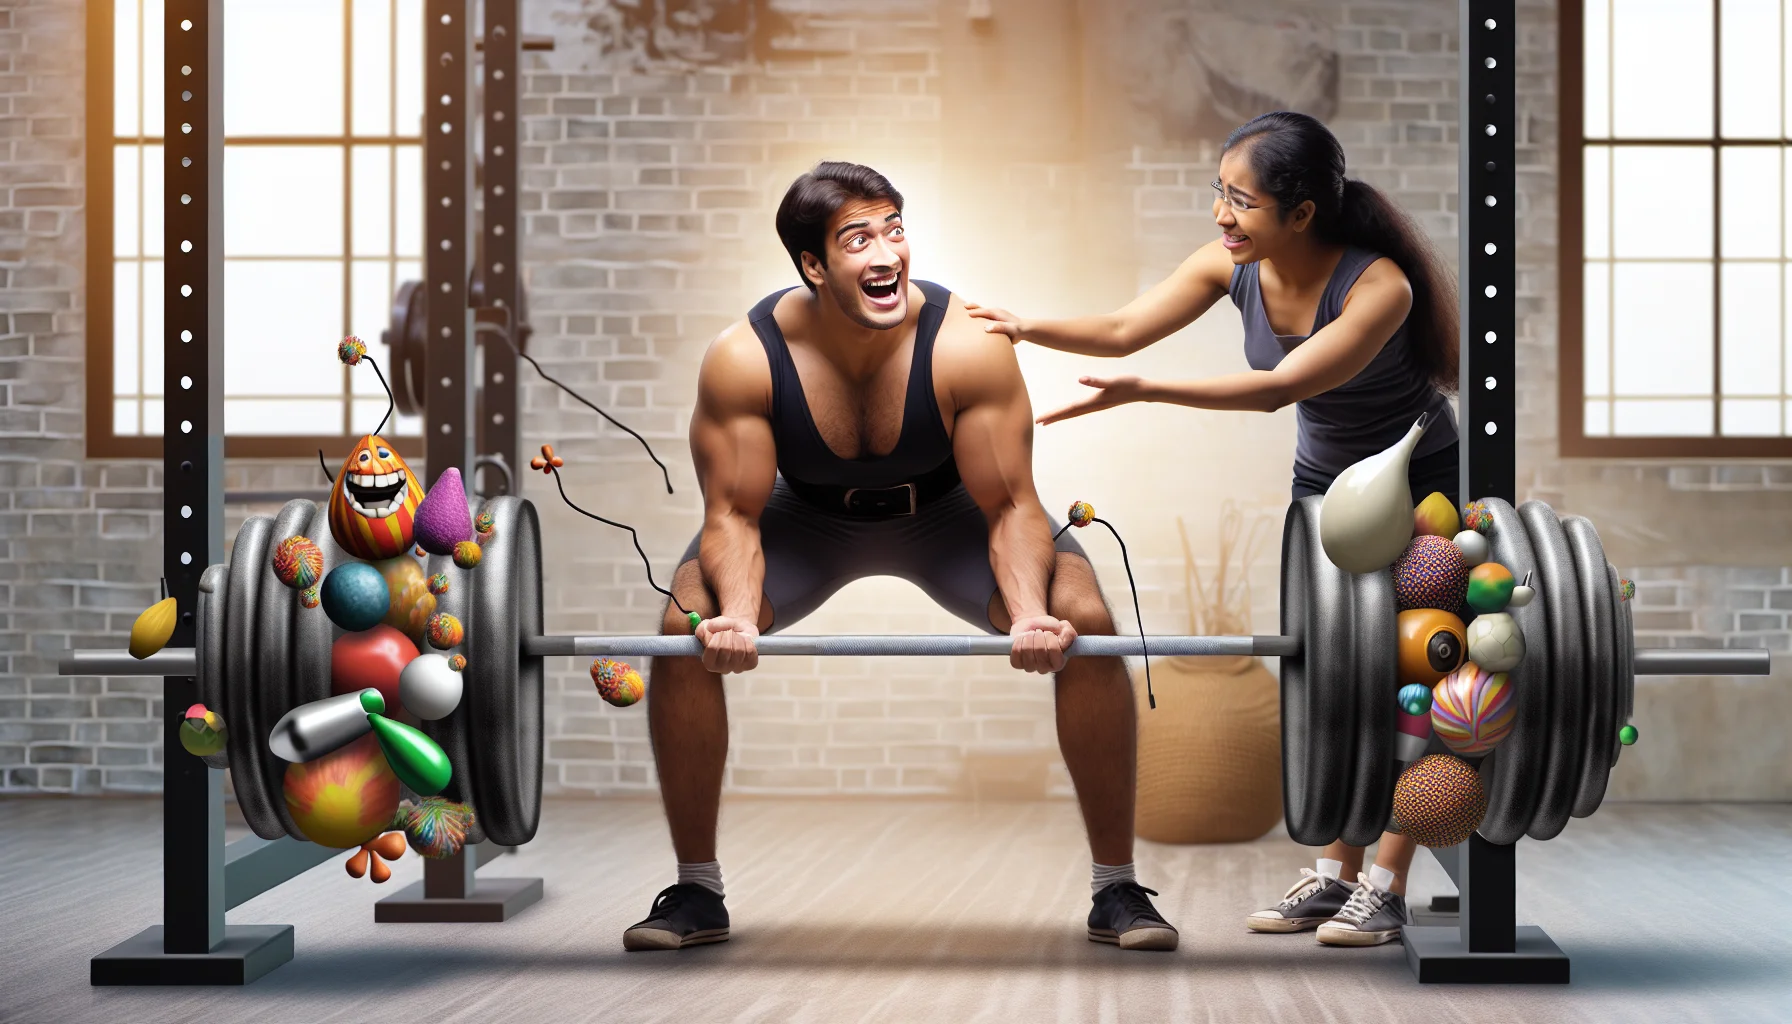 Create a humorous, realistic image representing the competitive and intense world of powerlifting, designed to encourage people to exercise. It could contain a scene in a gym with a South Asian man struggling to lift a barbell filled with oddly shaped weights perhaps resembling lightweight items like feathers or balloons, with a Black female trainer at his side, smiling and encouraging him. Yet, his attempt is sincere and demonstrates positive intent towards health and fitness.